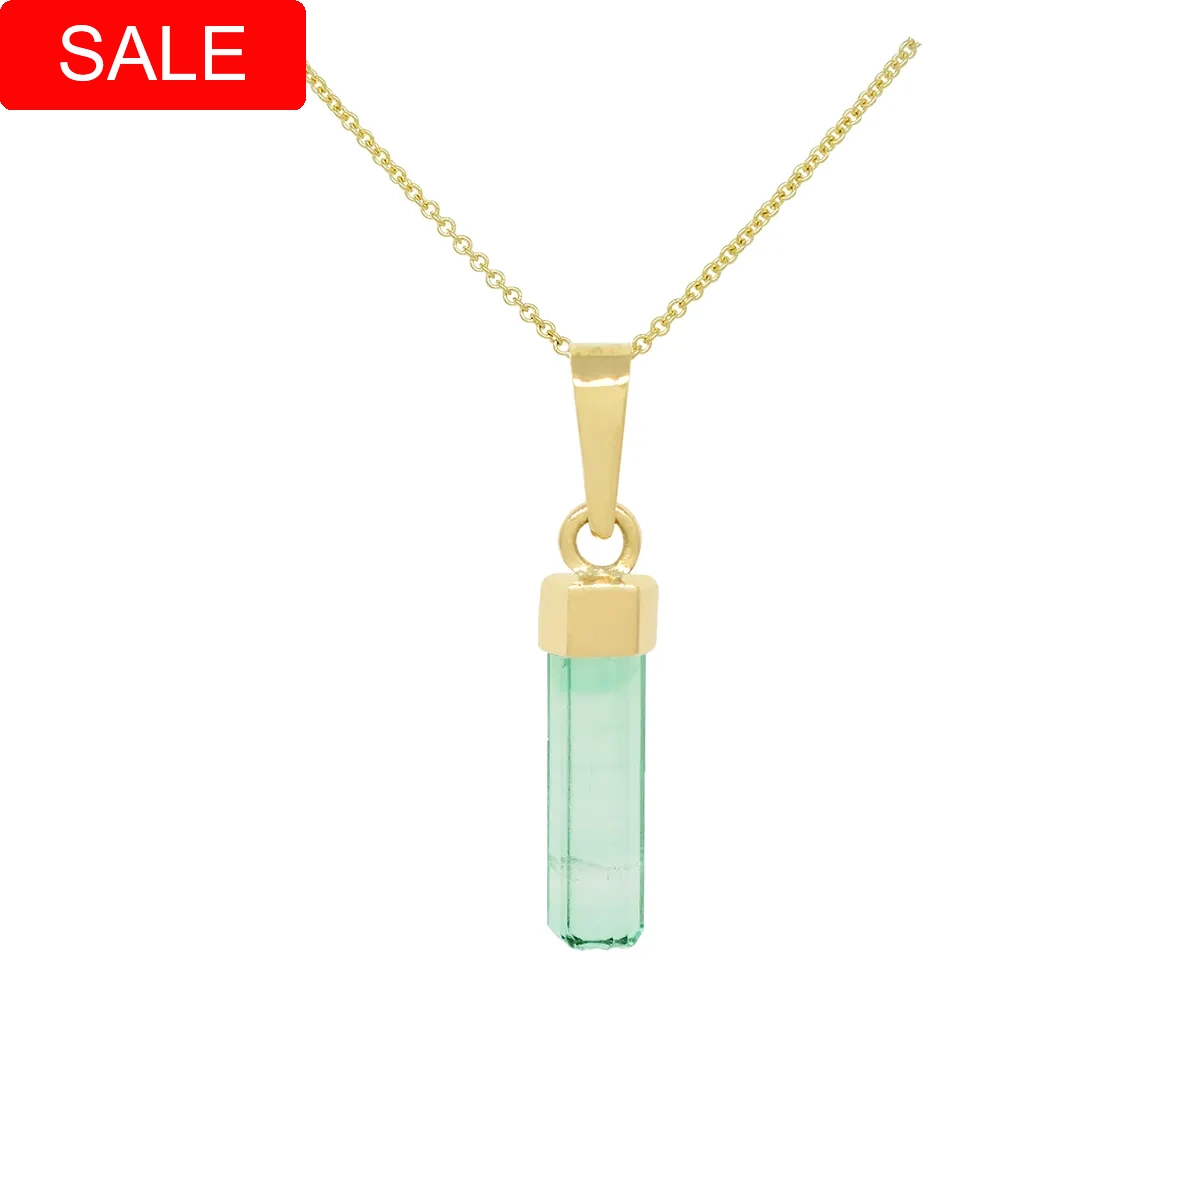 Raw 2.15 Ct. Uncut Natural Colombian Emerald in 18K Gold Pendant